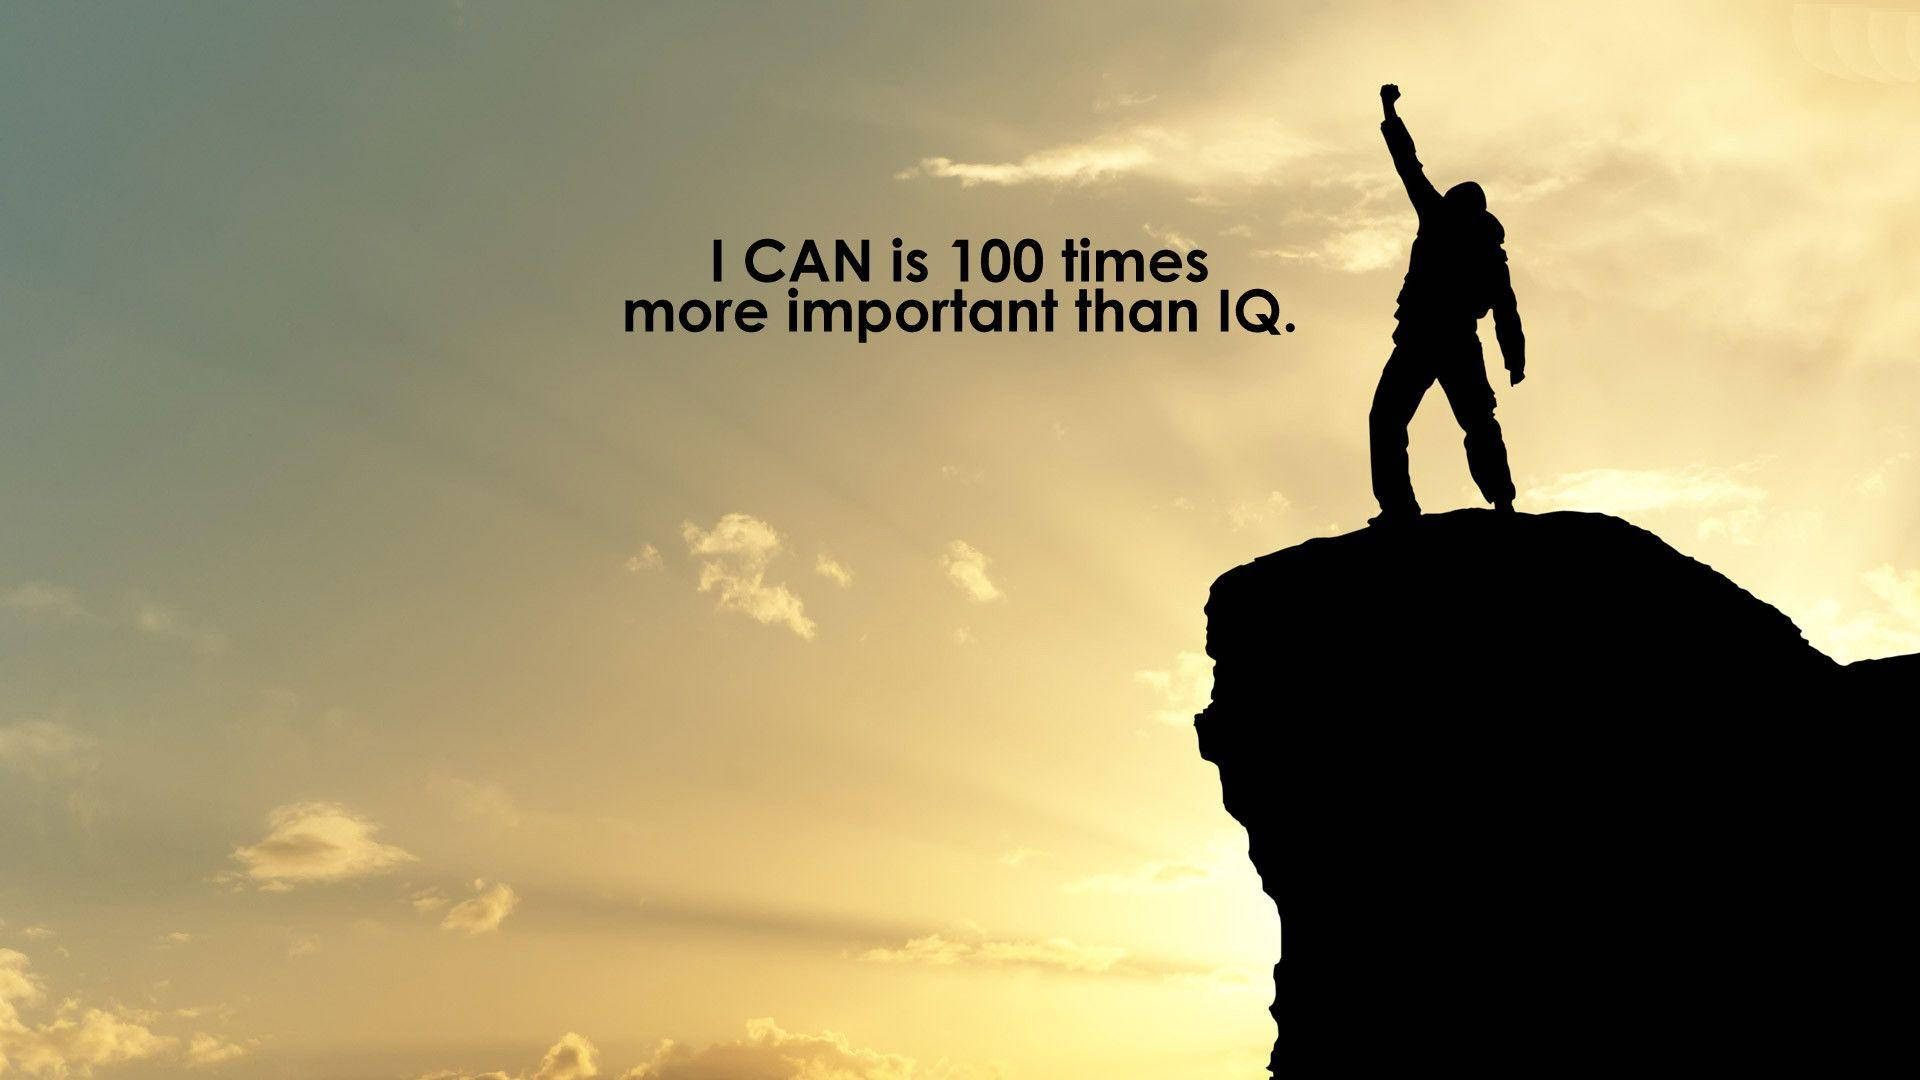 Inspirational Quotes About I Can Background